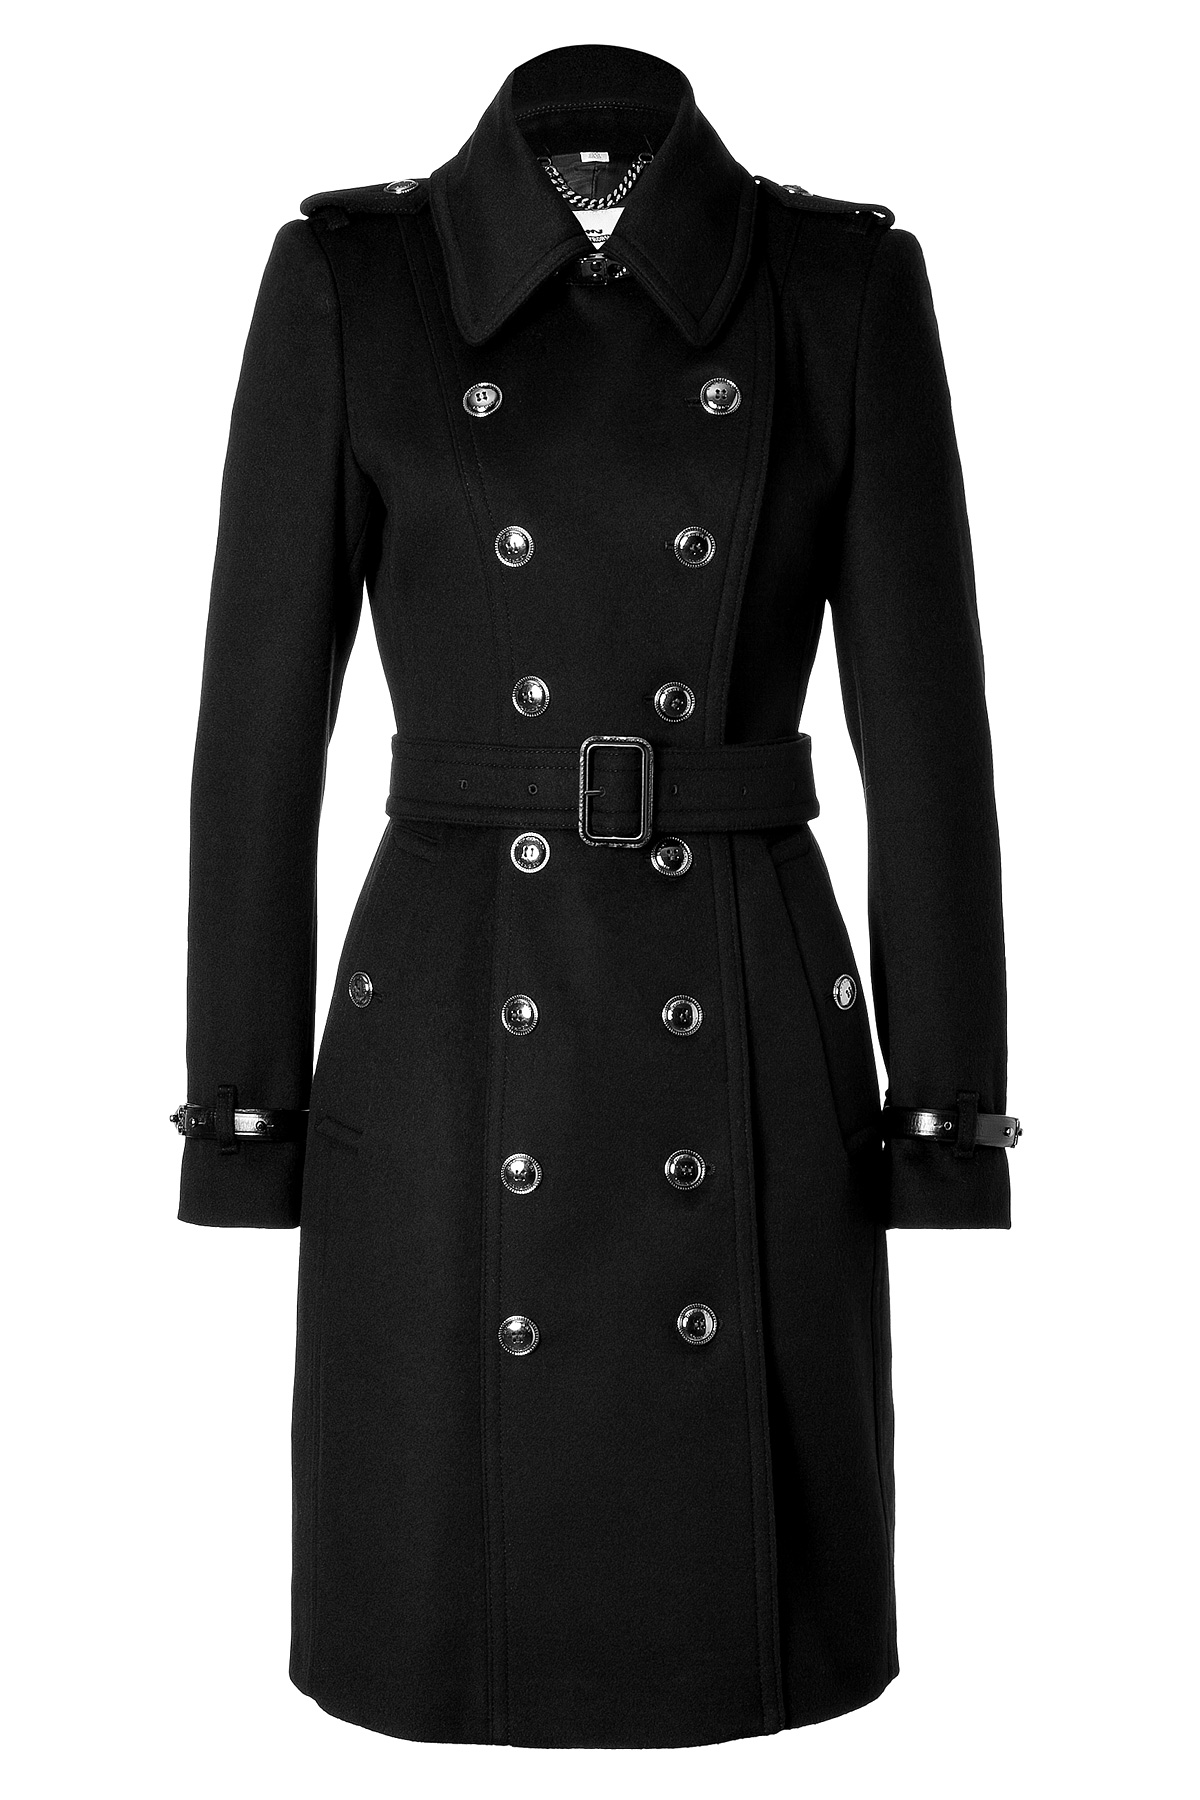 Lyst - Burberry Wool Cashmere Duncannon Coat in Black